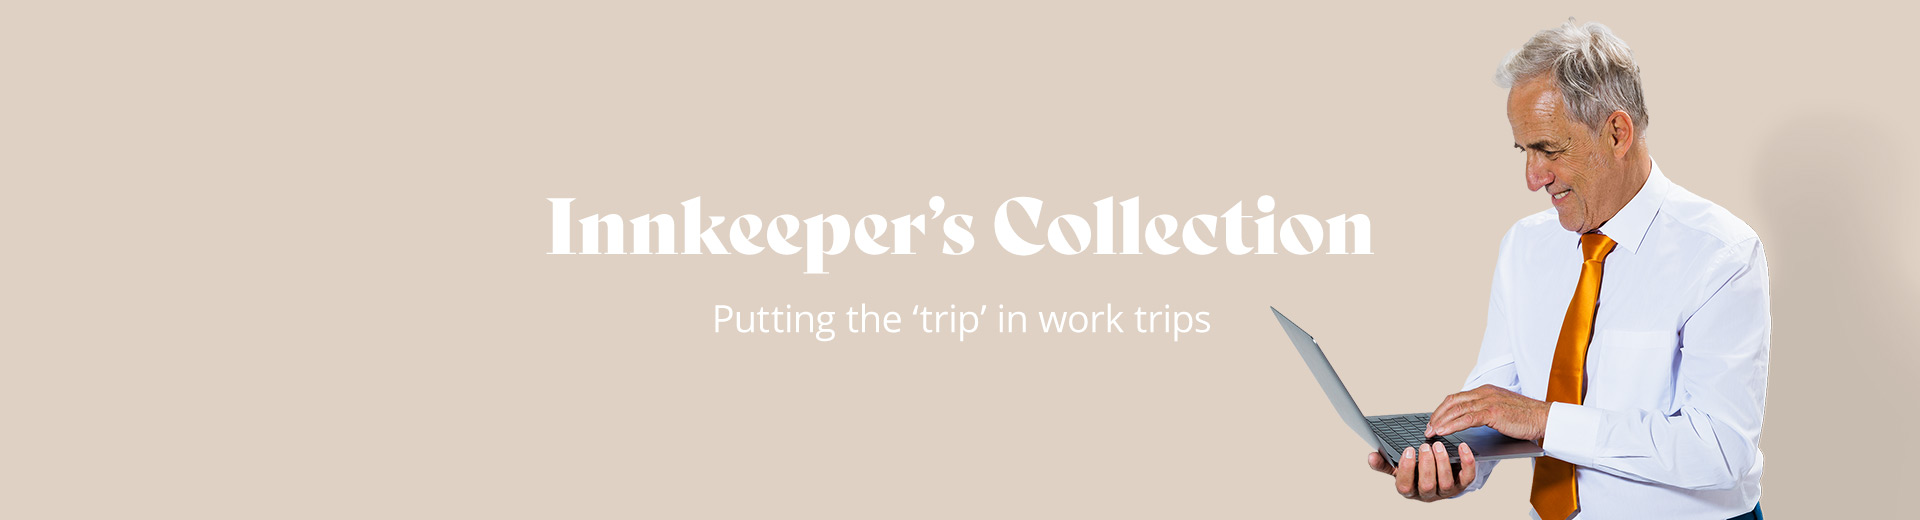 Innkeeper’s Collection: Putting the ‘trip’ in Work Trips.